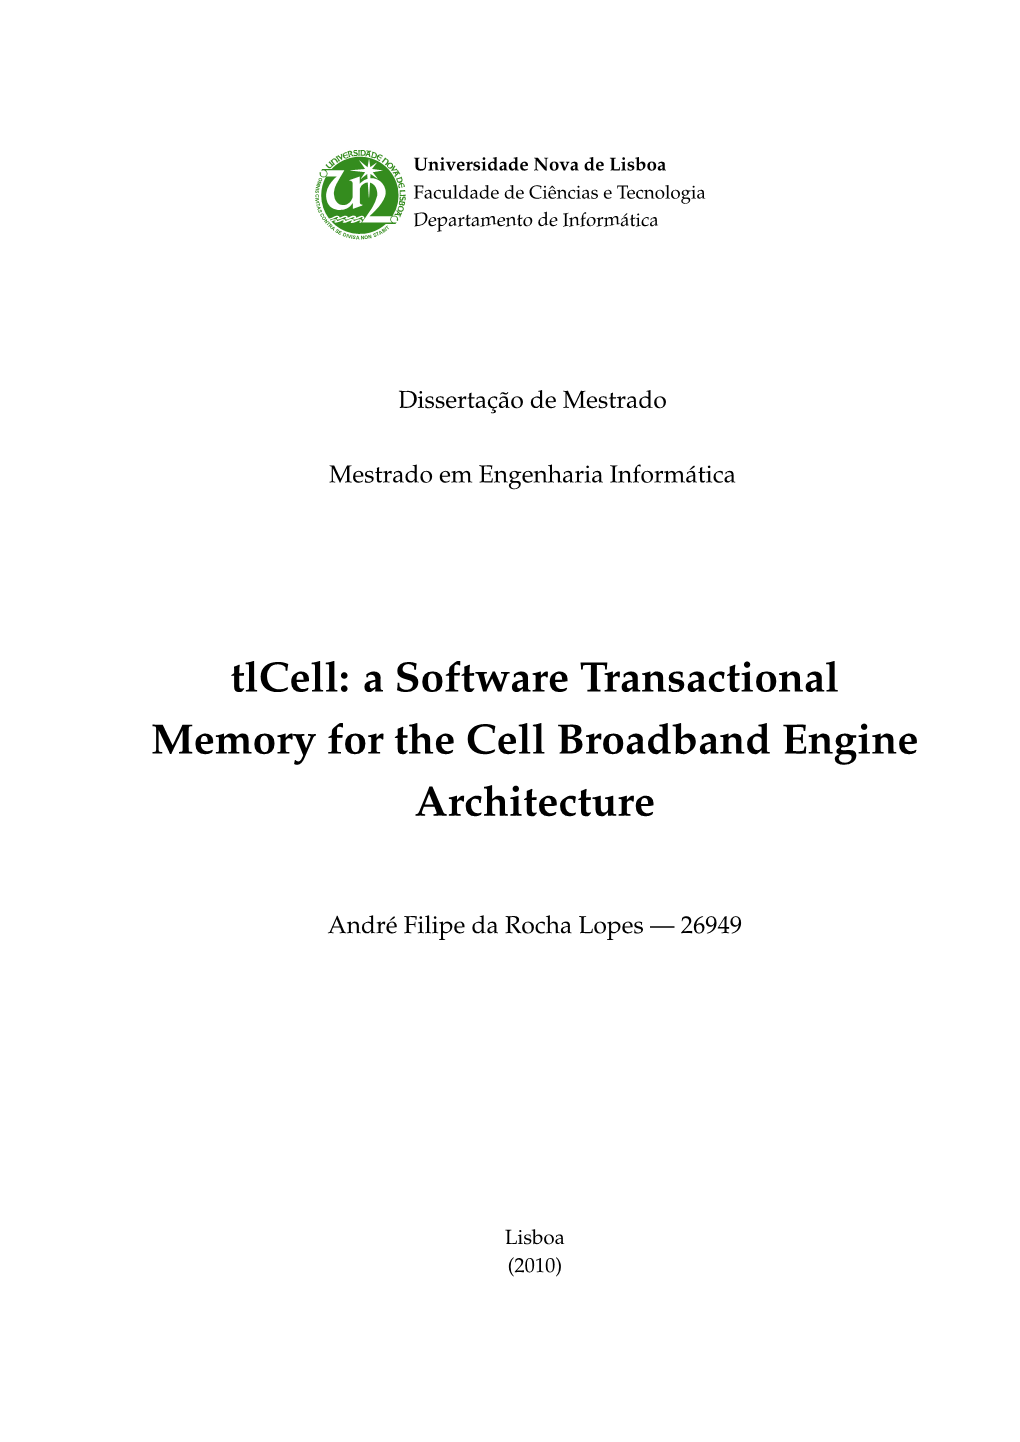 A Software Transactional Memory for the Cell Broadband Engine Architecture